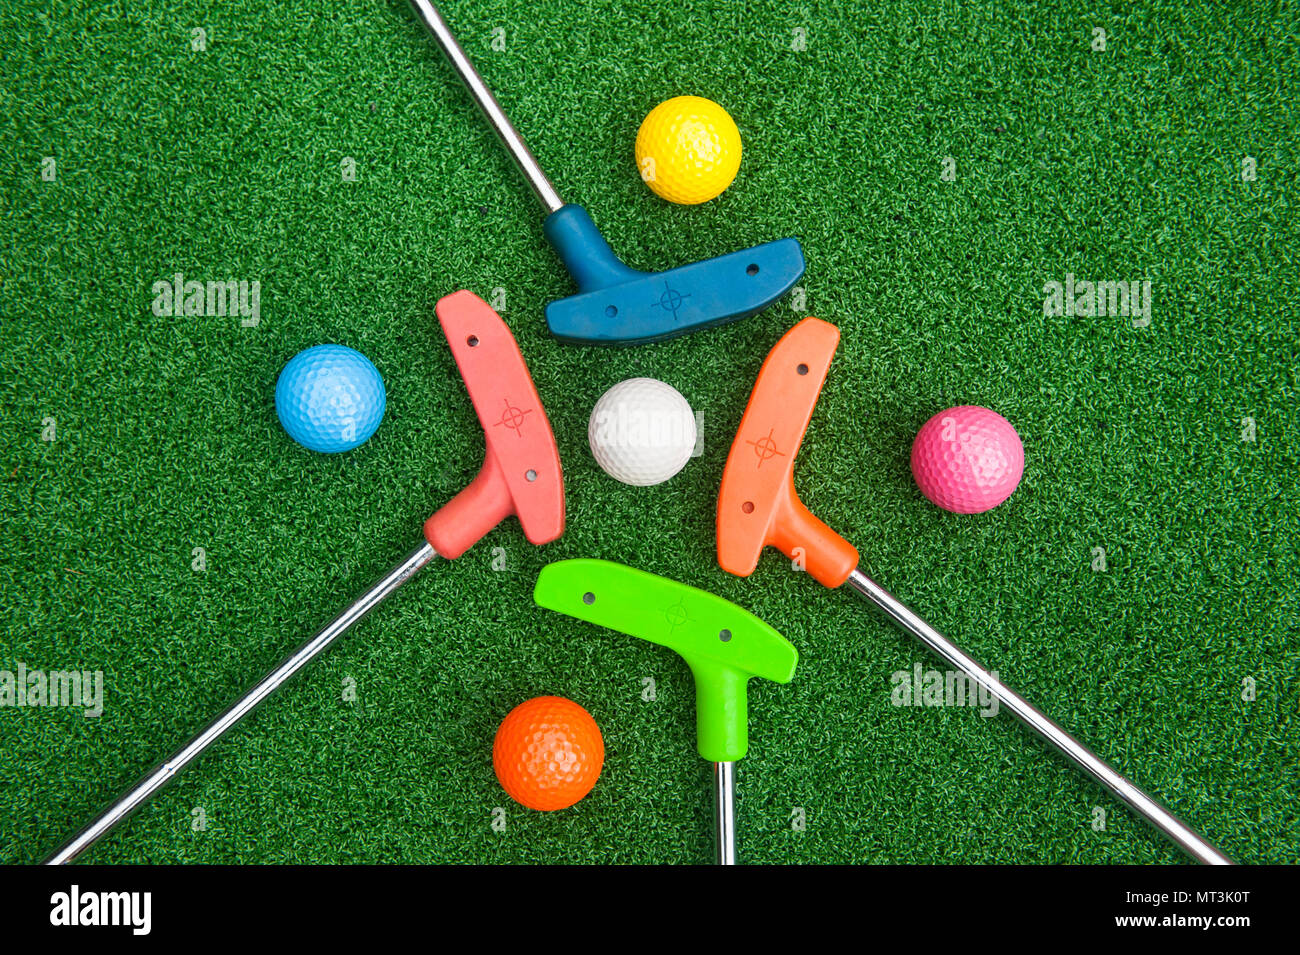 Four colorful golf putters with golf balls on synthetic grass Stock Photo